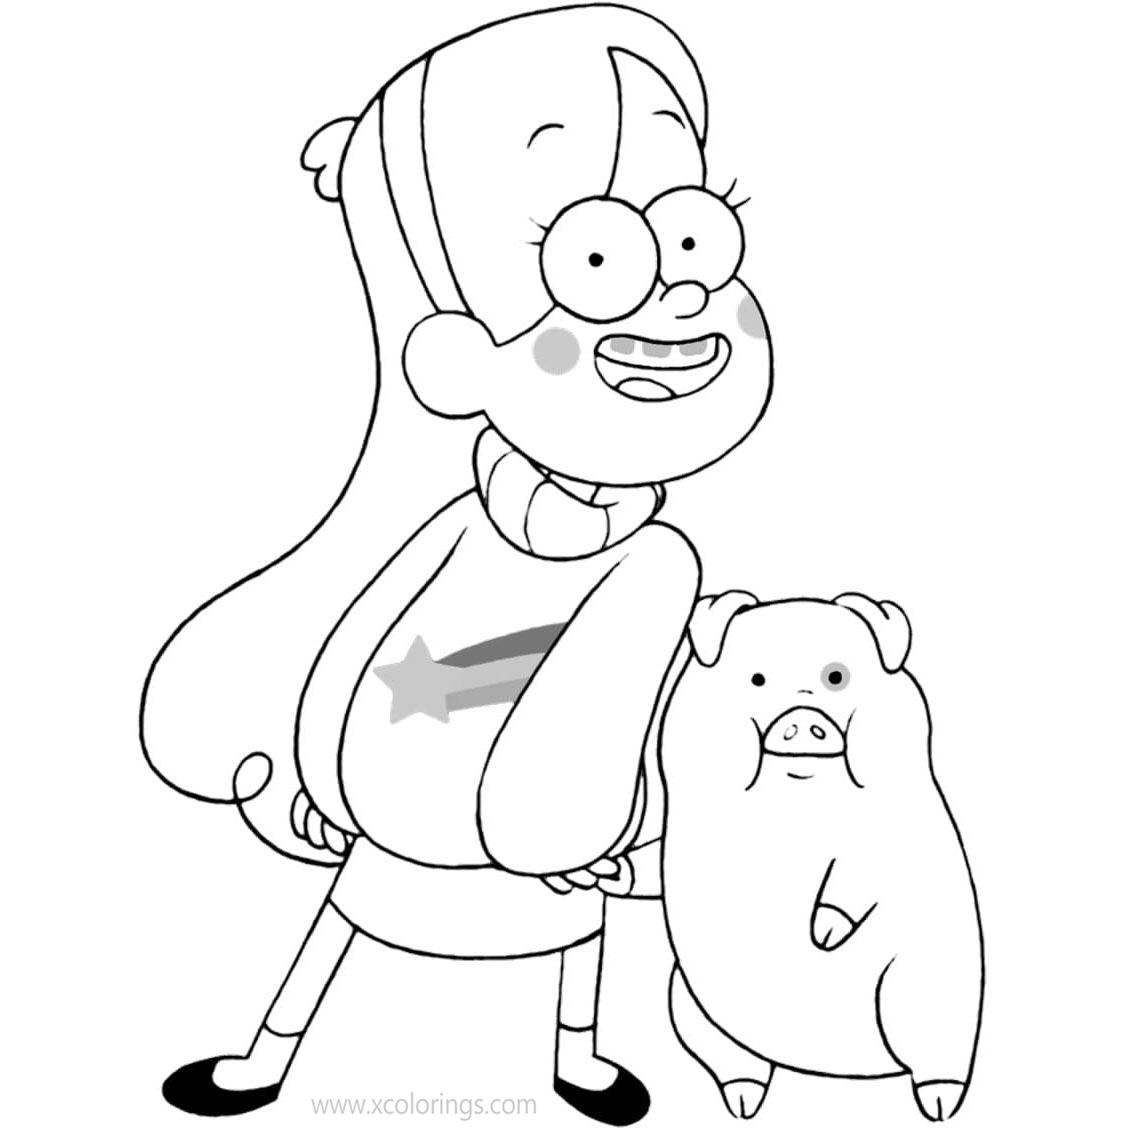 Free Gravity Falls Wendy and Waddles Coloring Pages printable